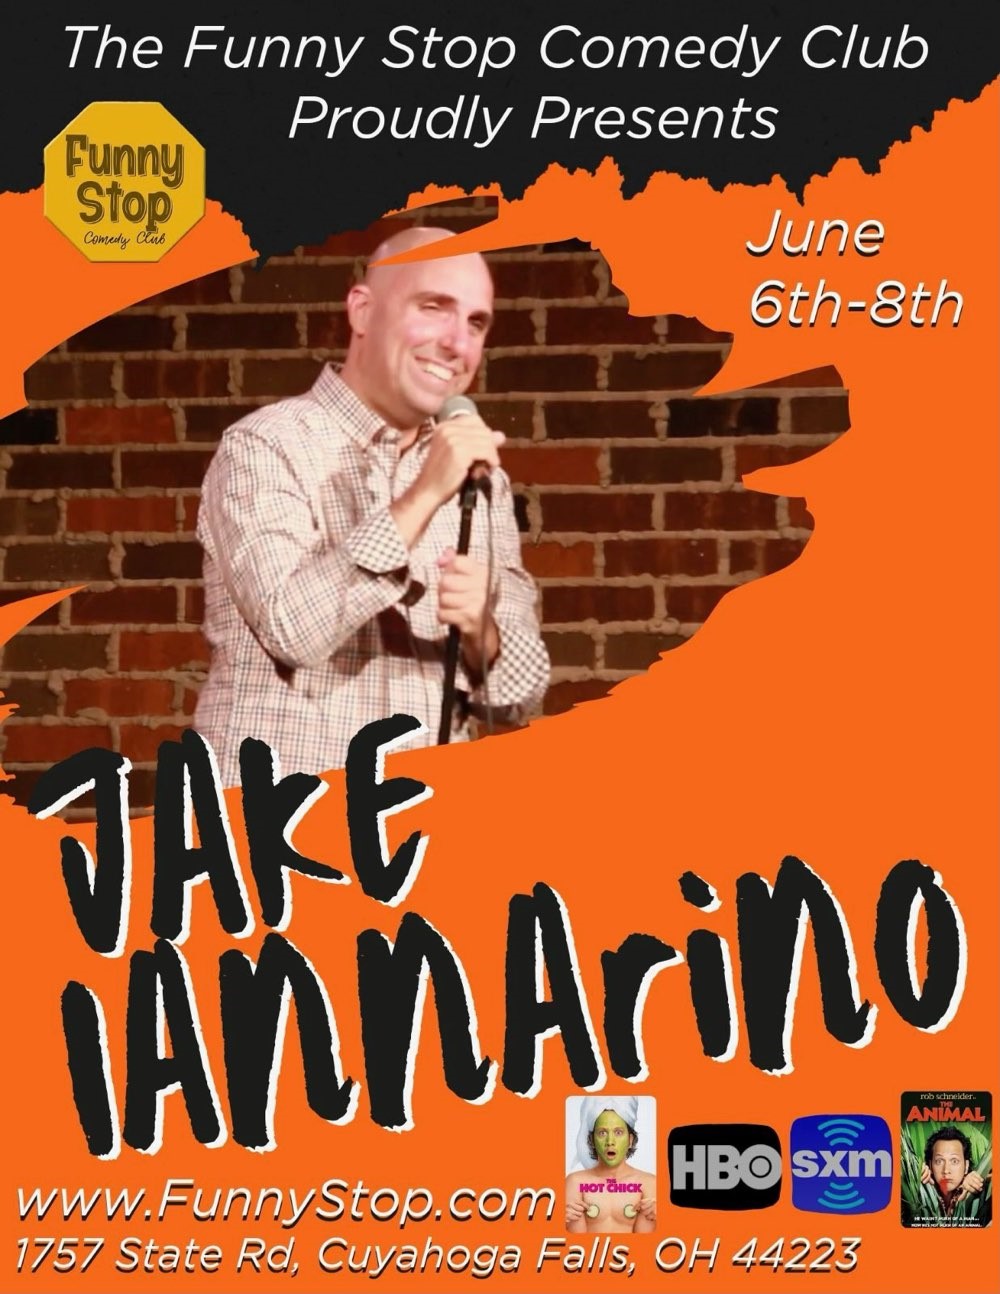 Jake Iannarino - Sat. 7:30PM Show Funny Stop Comedy Club on Jun 08, 19:30@Funny Stop Comedy Club - Buy tickets and Get information on Funny Stop funnystop.online